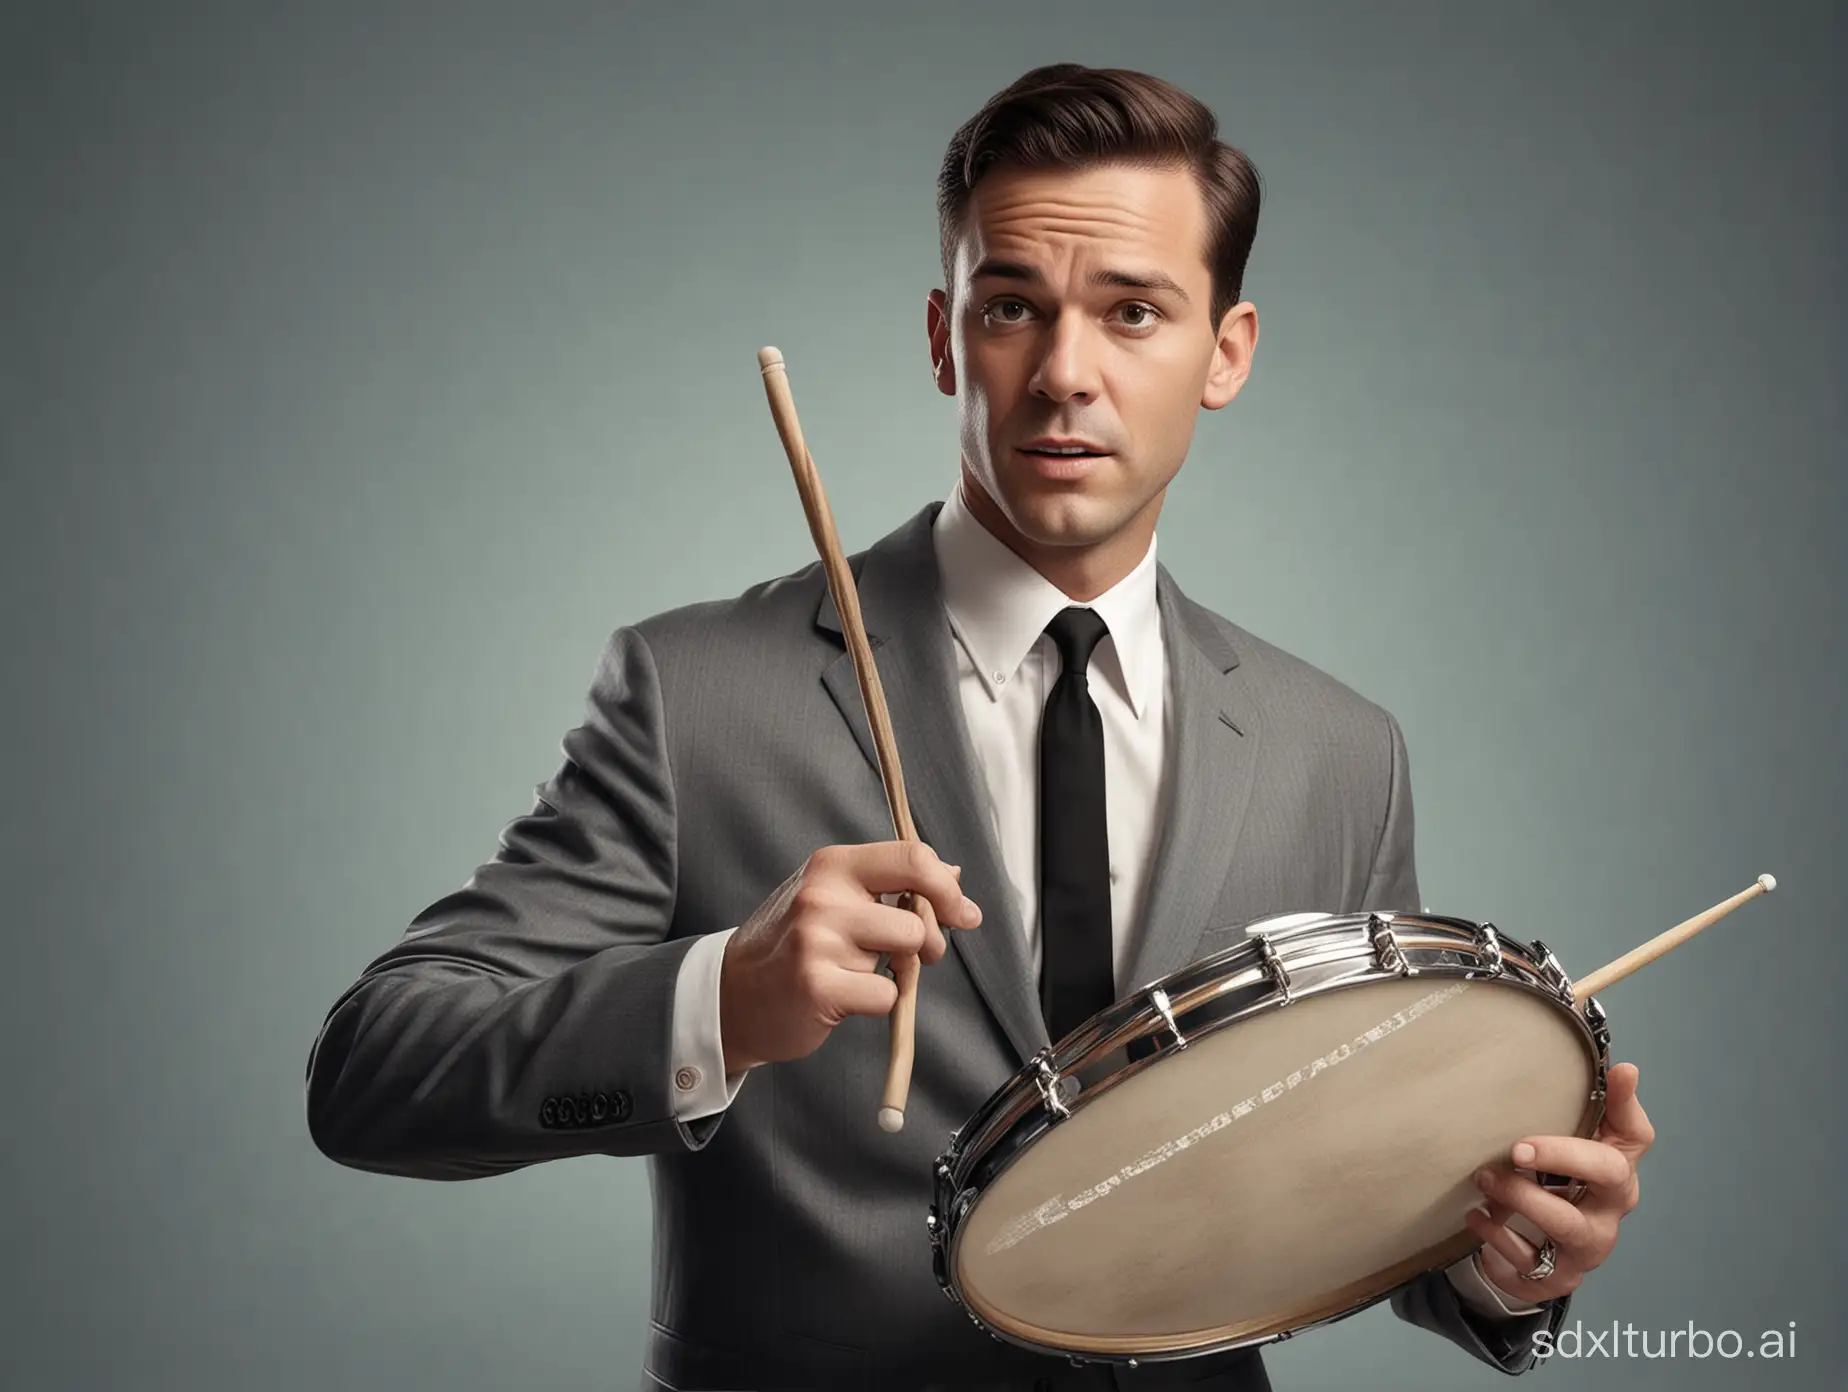 An extremely photo realistic high resolution image of a man with a snare drum for his head in a 1960s jazz suit and tie his hands are each holding a drum stick.